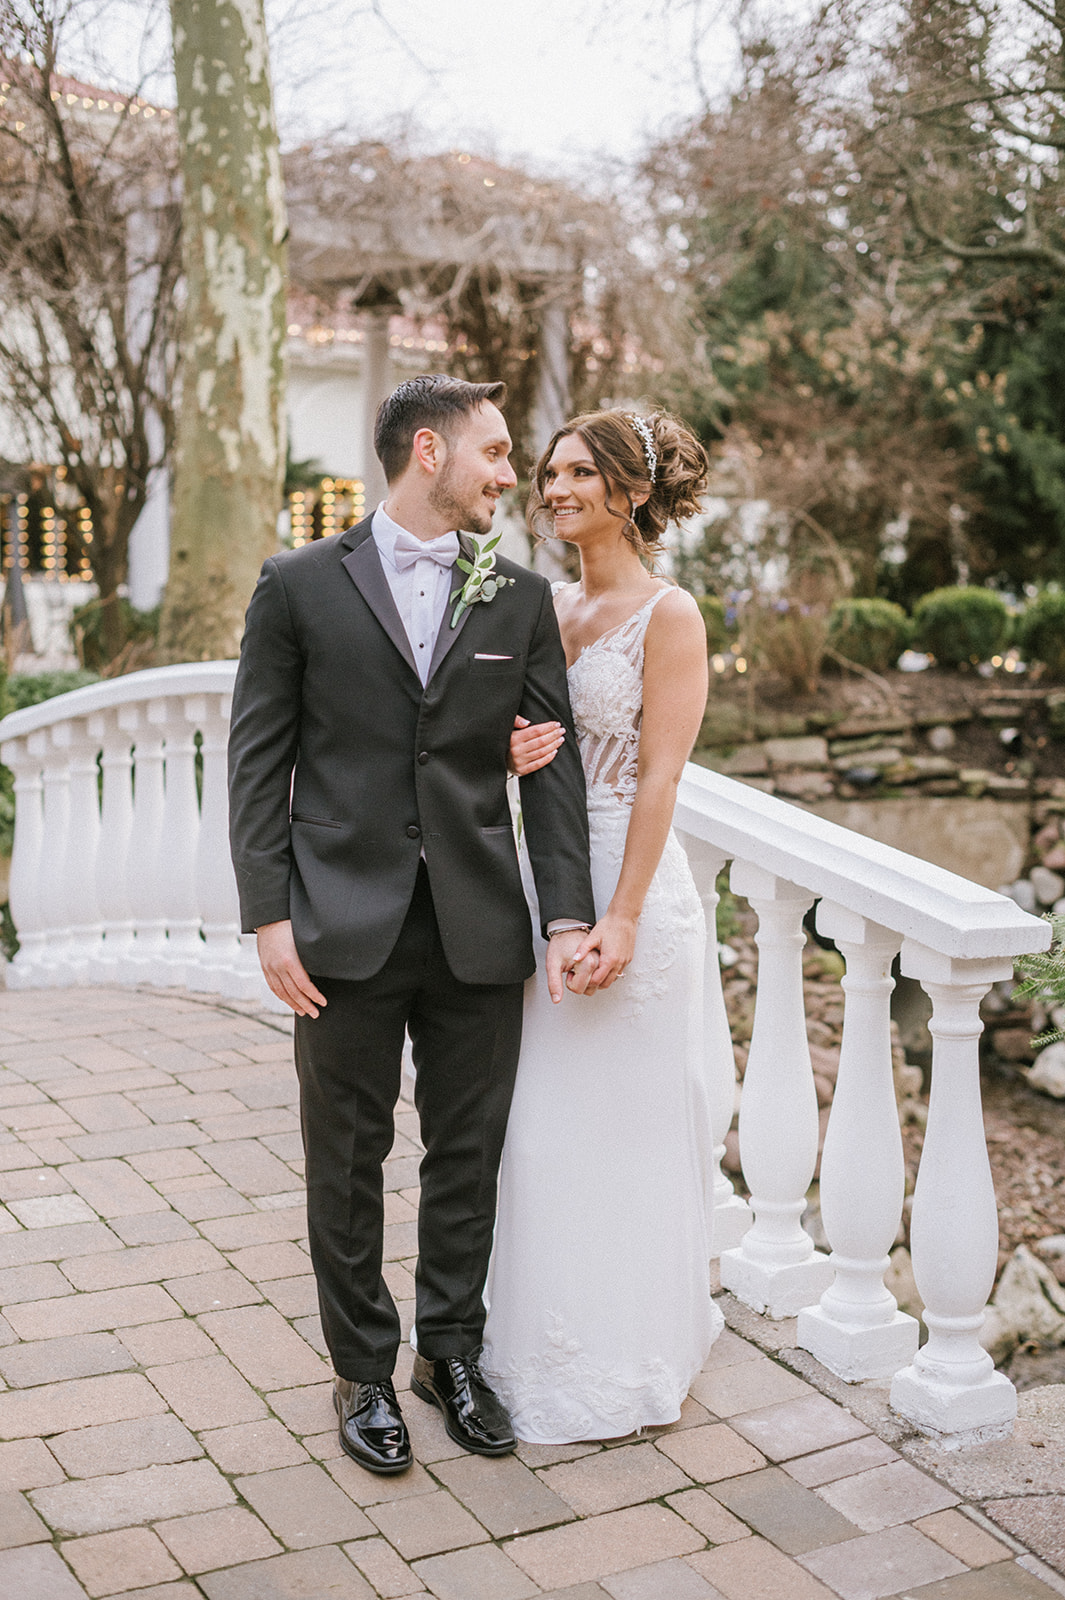 A winter wedding at Nanina's in the Park in northern NJ